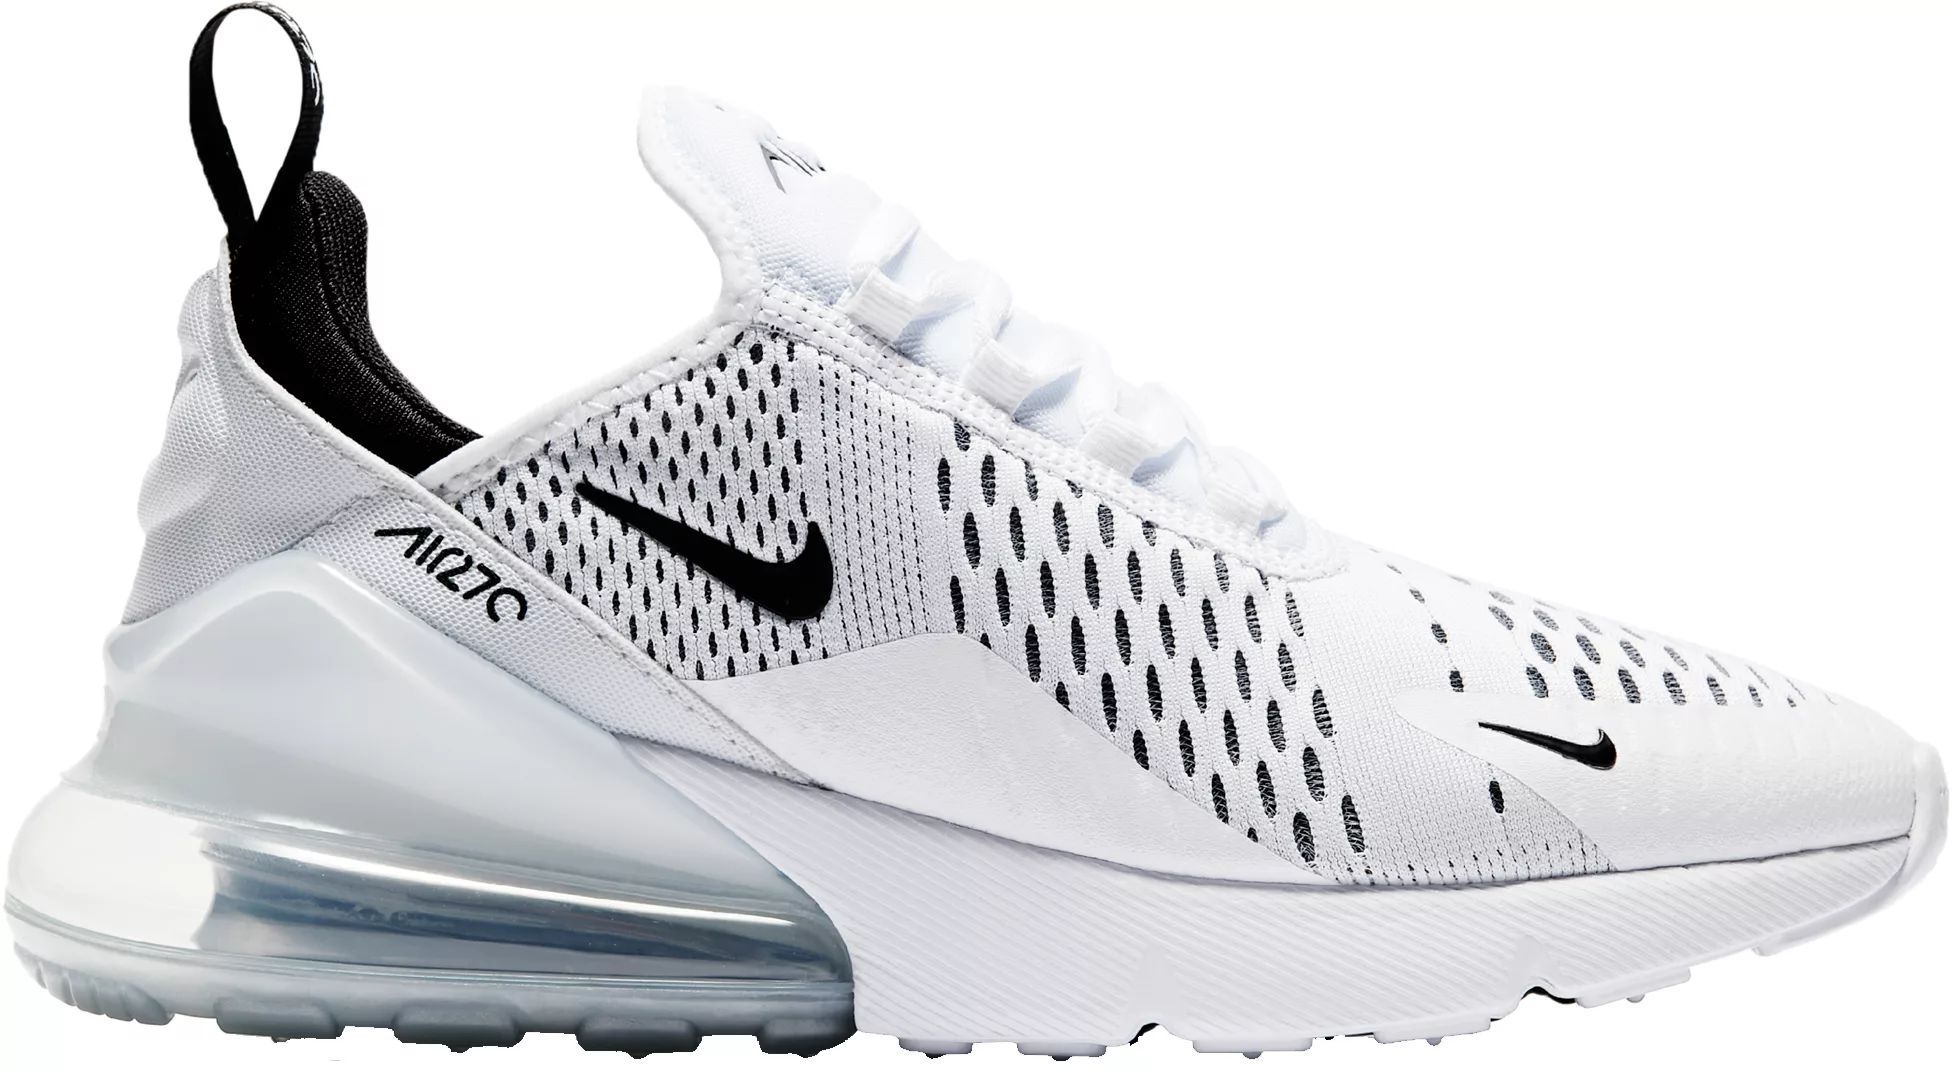 Nike Women's Air Max 270 Shoes, Size 5.5, White/Black | Dick's Sporting Goods